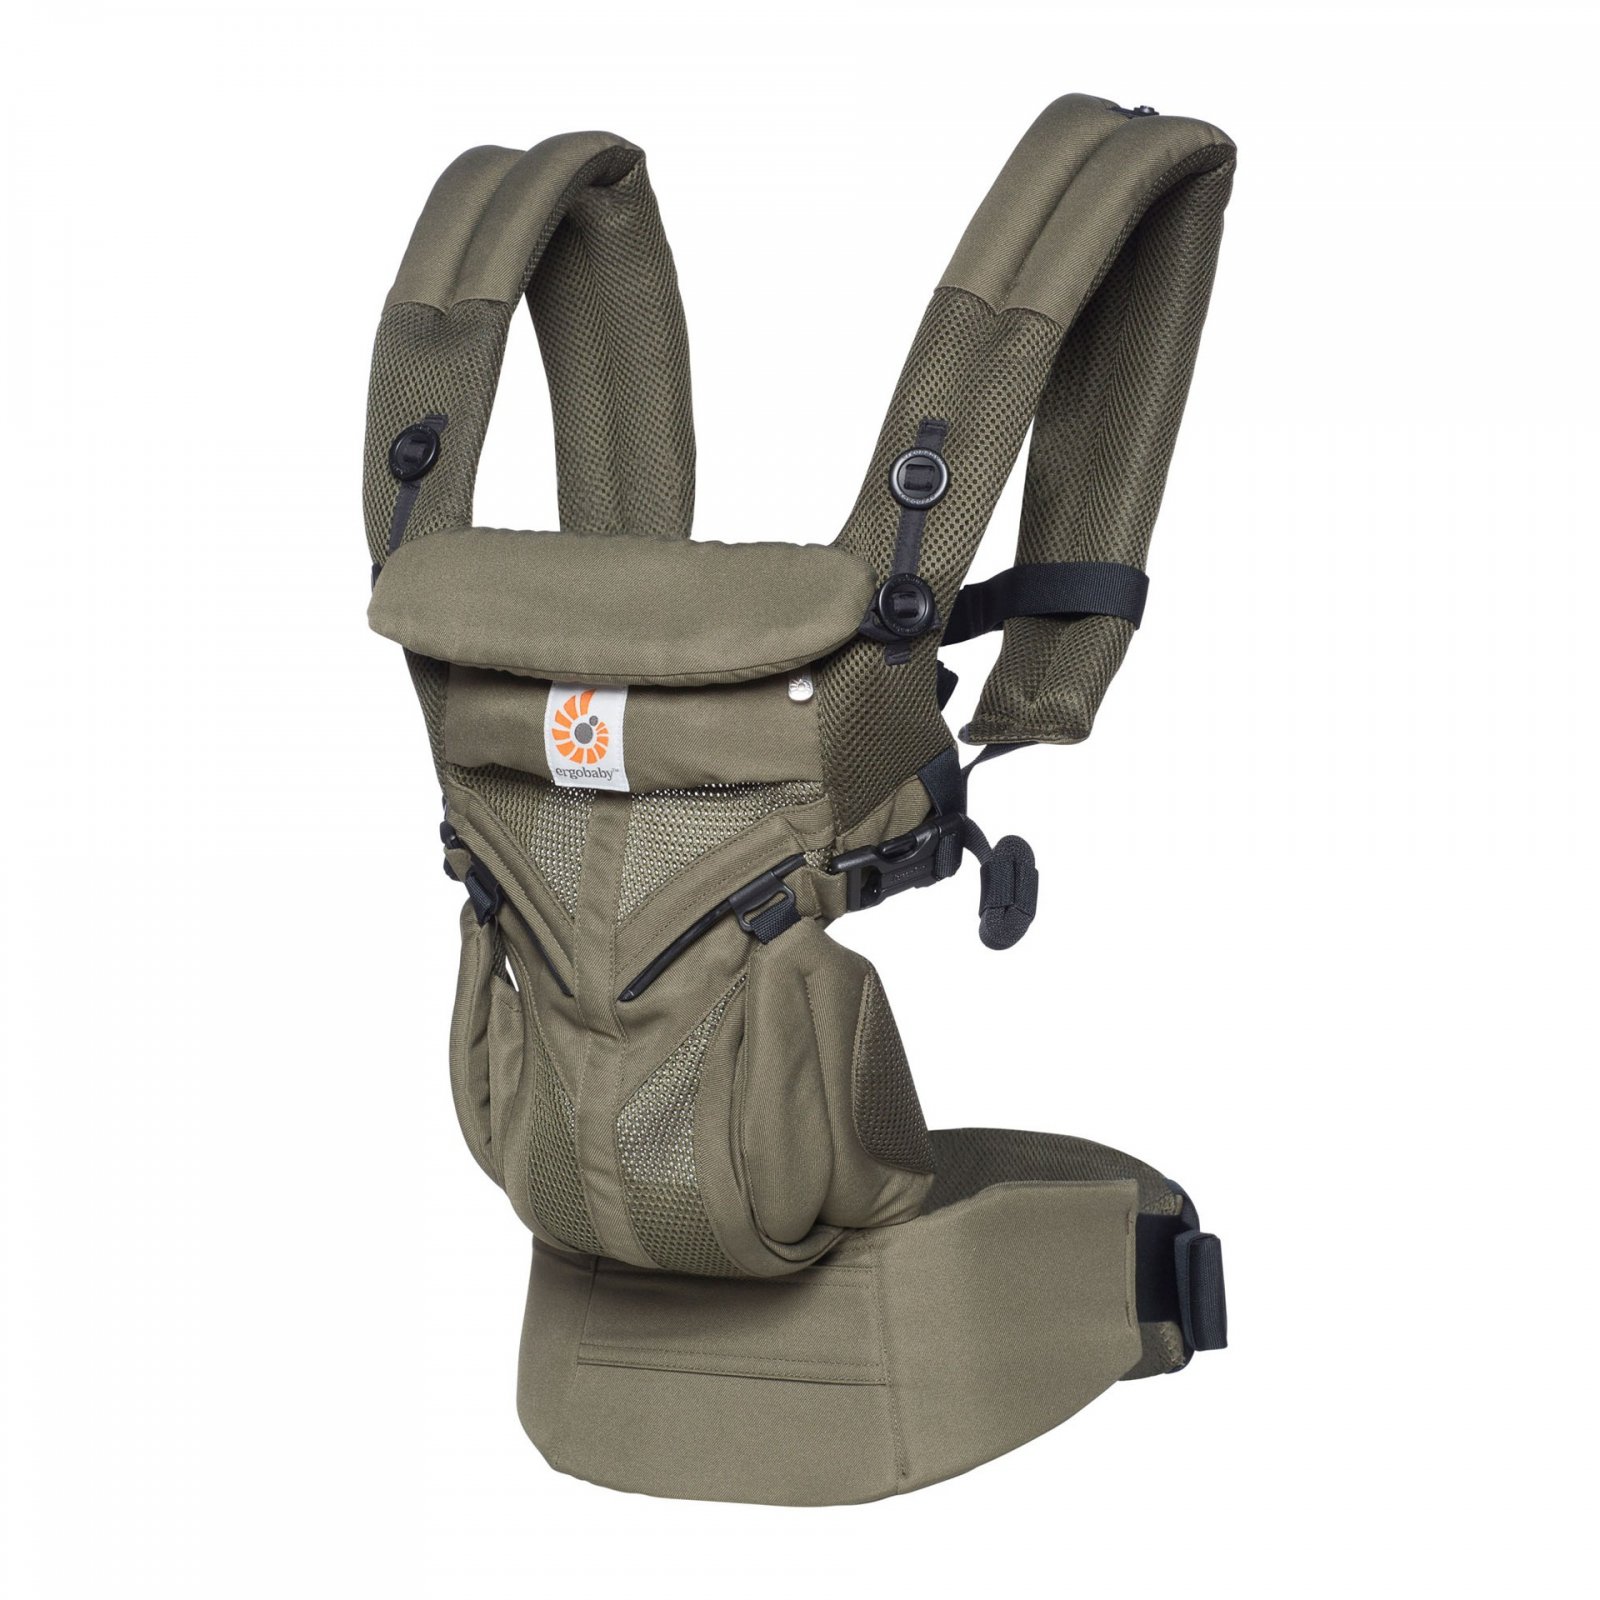 Order the Ergobaby Baby Carrier 360 OMNI 4 Positions ...